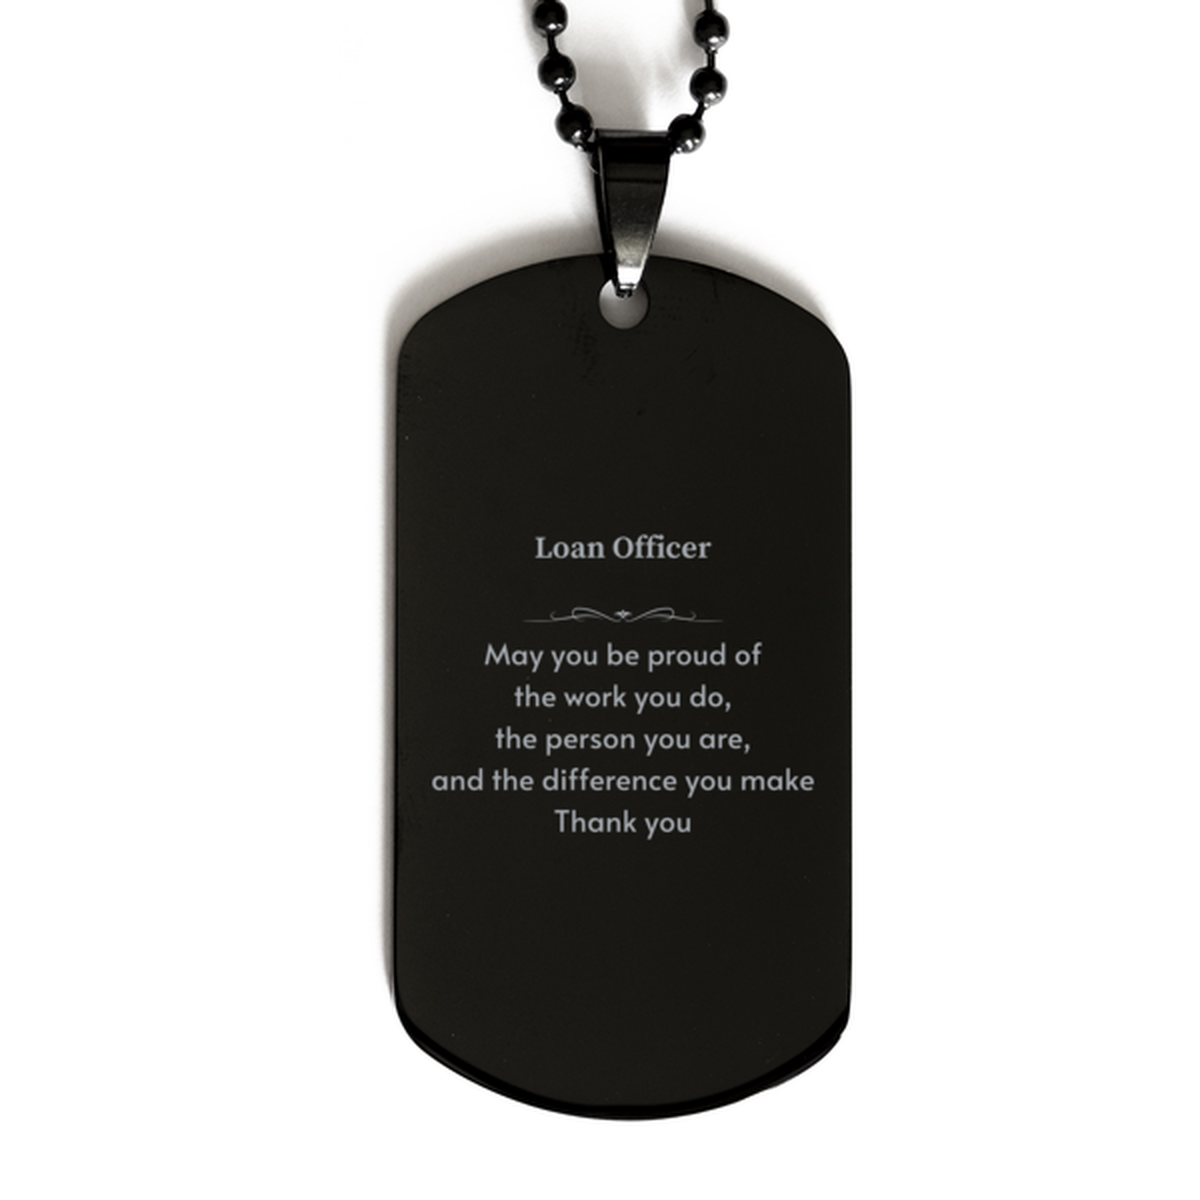 Heartwarming Black Dog Tag Retirement Coworkers Gifts for Loan Officer, Loan Officer May You be proud of the work you do, the person you are Gifts for Boss Men Women Friends